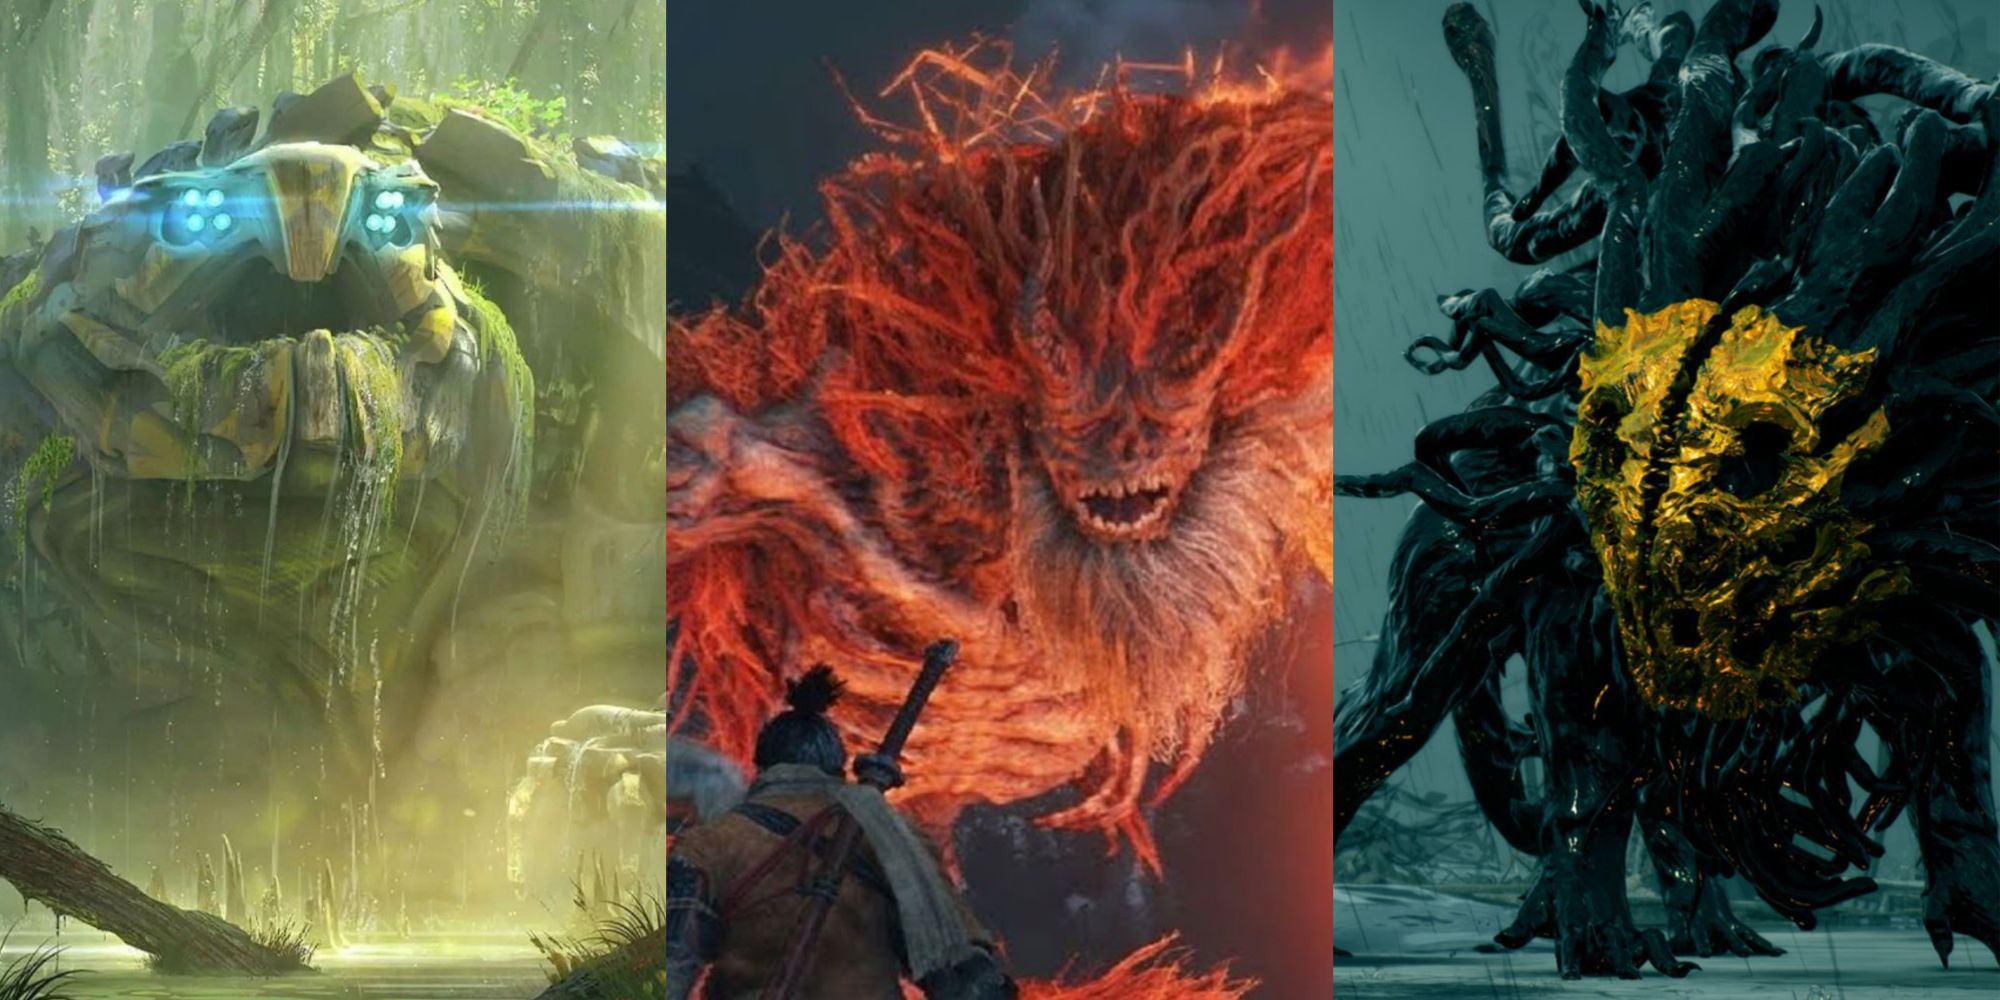 A three image collage that has a Shellsnapper from Horizon Forbidden West, Wolf facing the Demon of Hatred in Sekiro: Shadows Die Twice, and a gold-masked BT creature from Death Stranding.